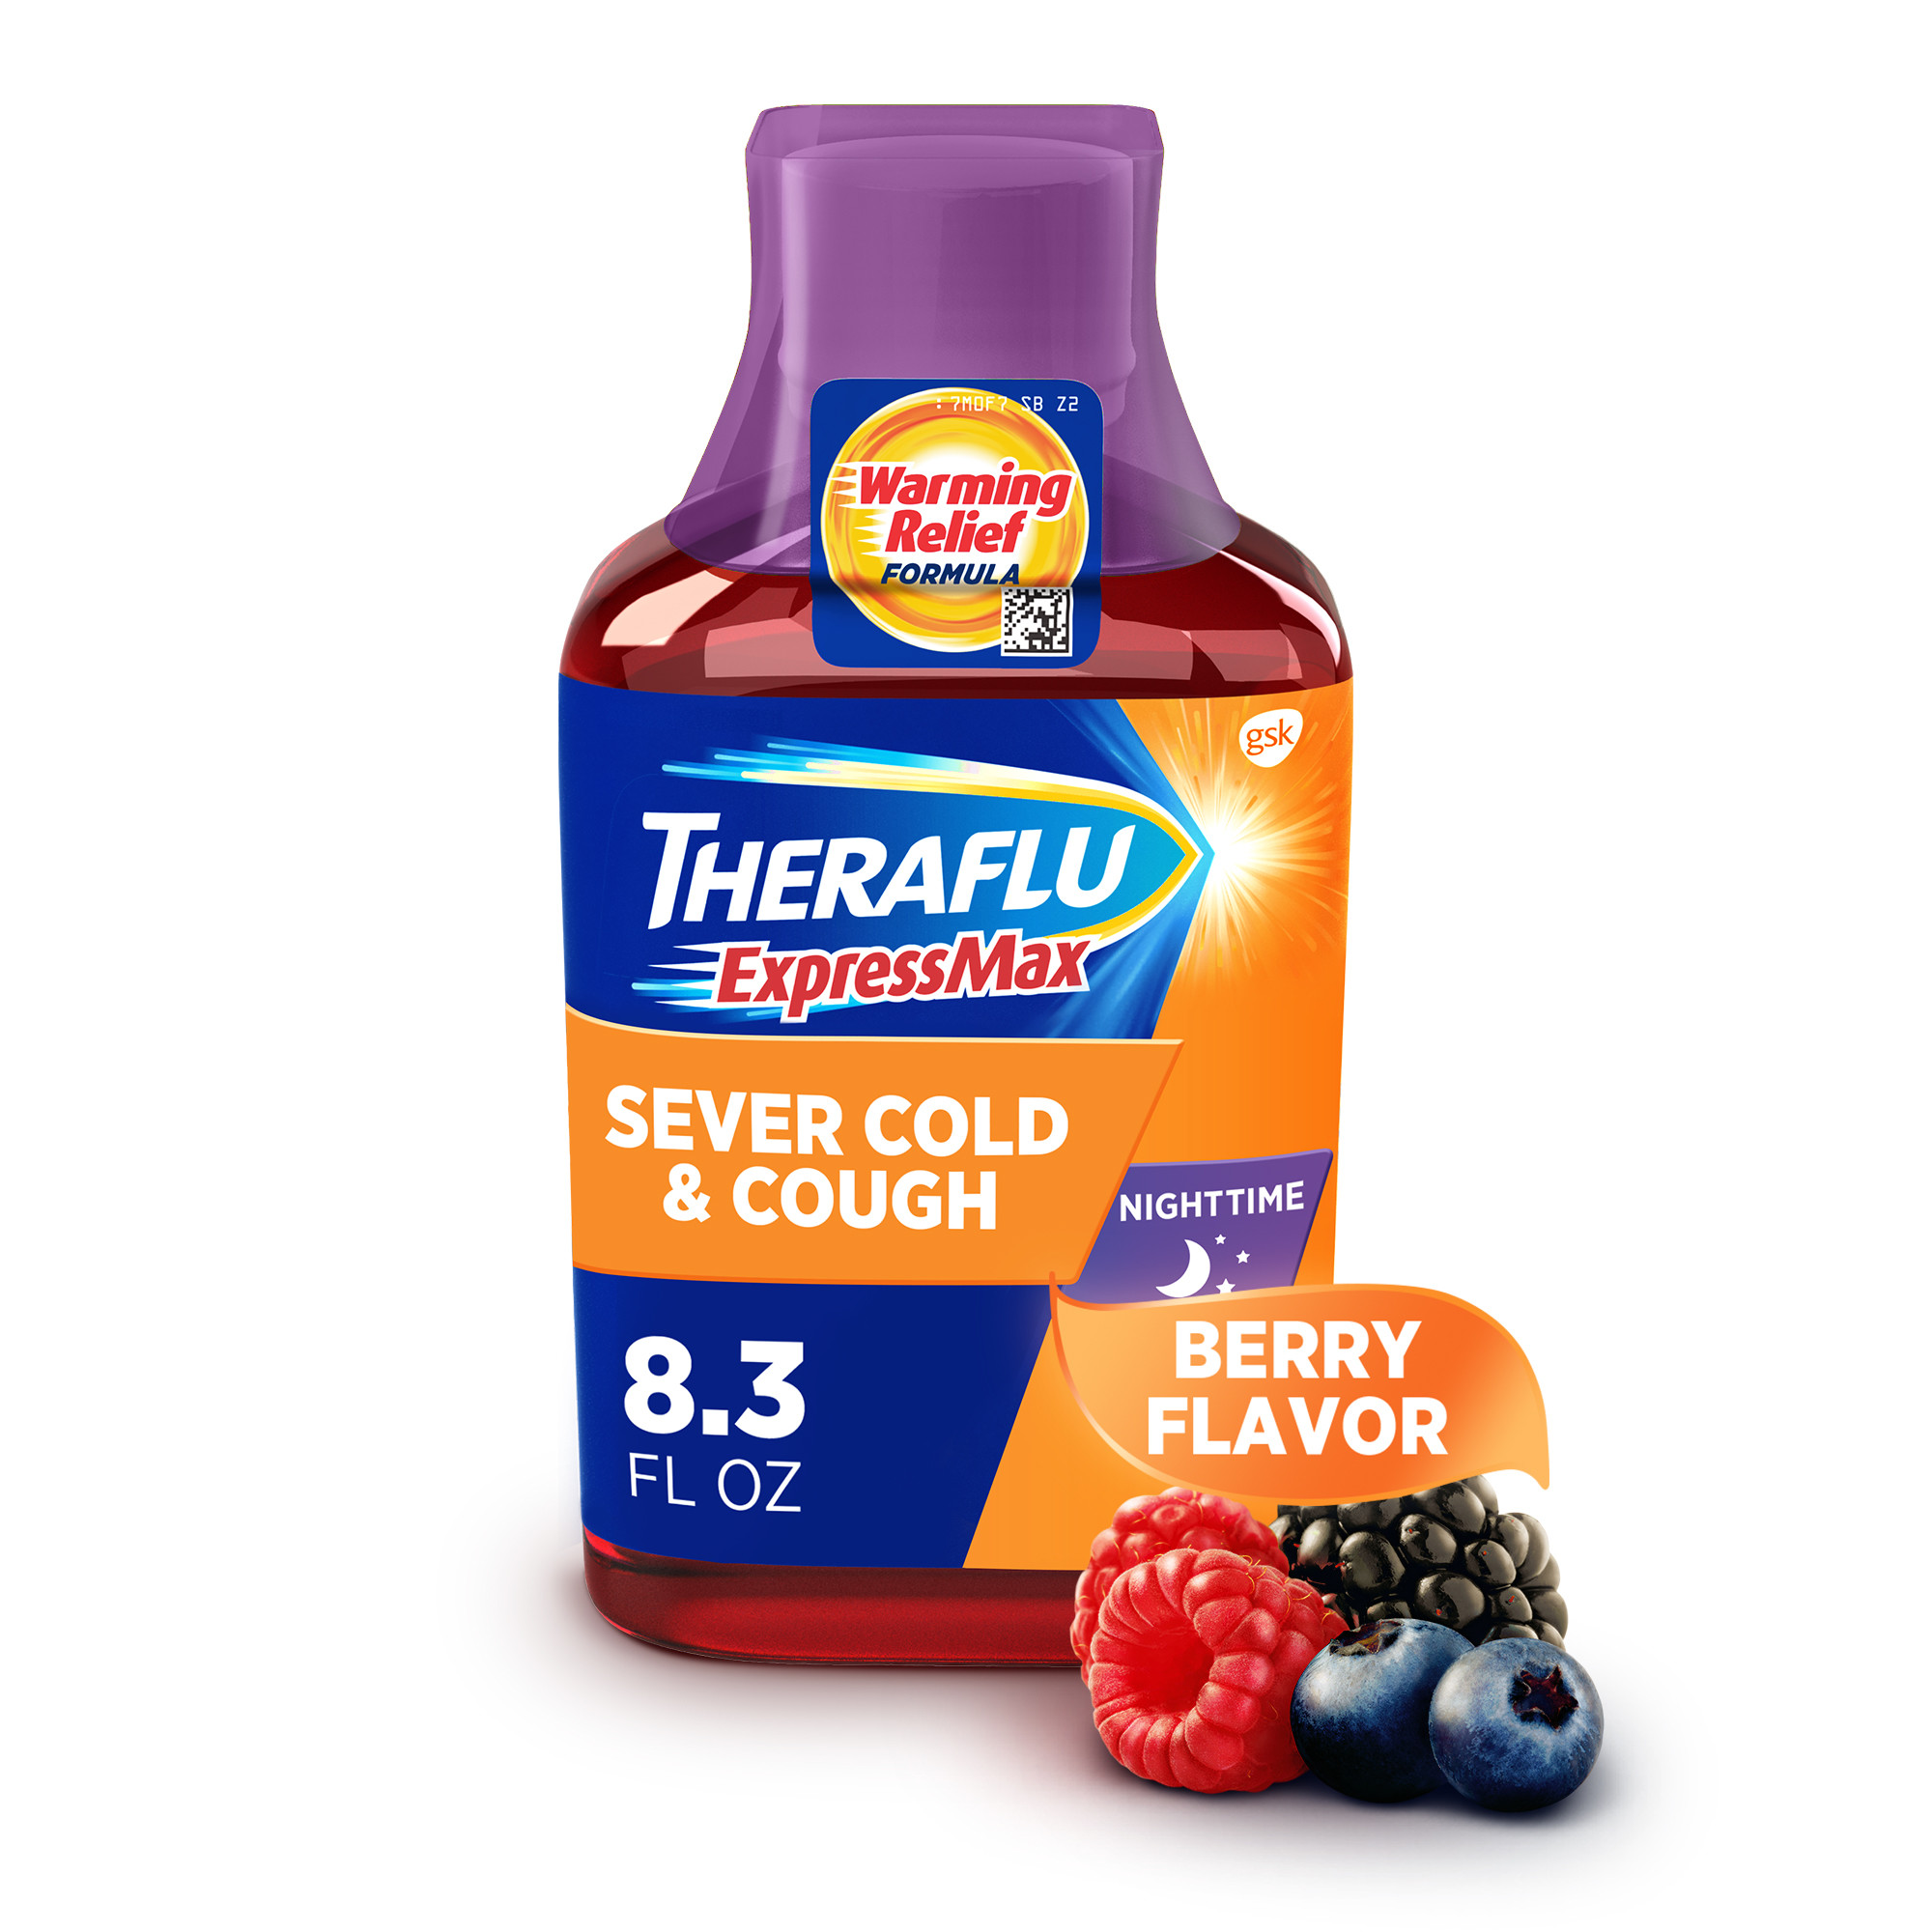 Theraflu Expressmax Nighttime Severe Cold and Cough Syrup - 8.3 oz - image 1 of 5